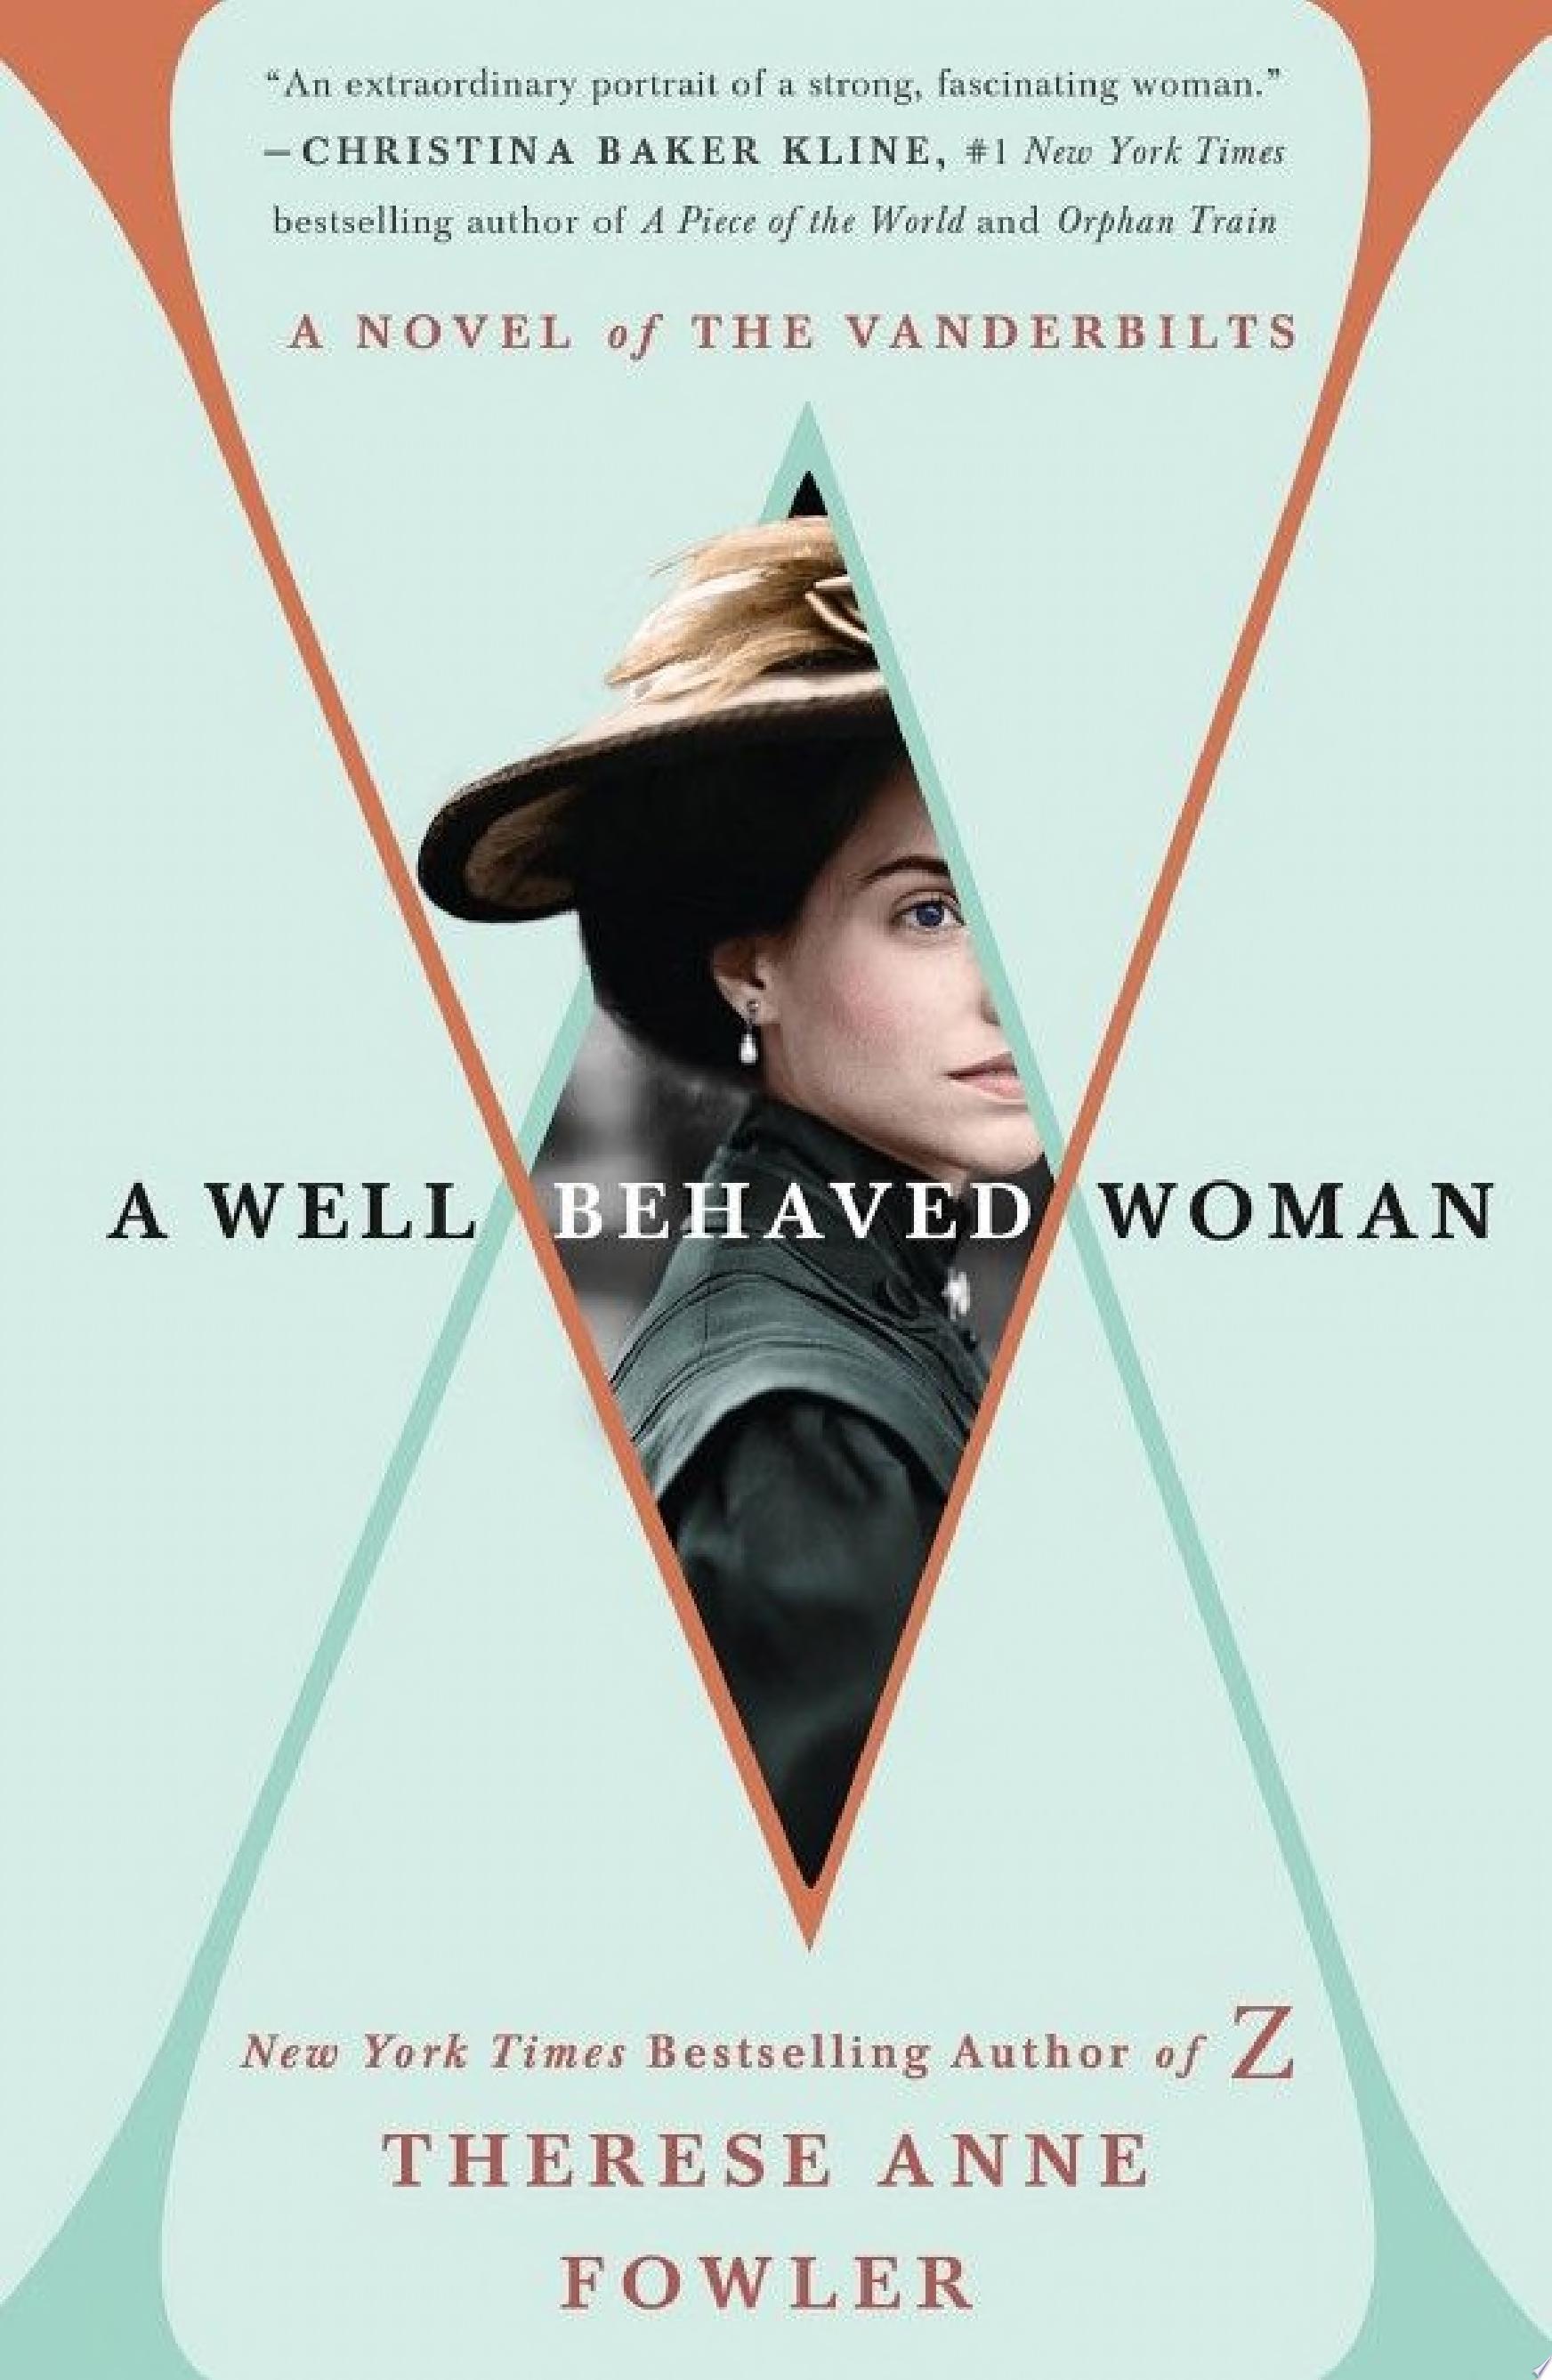 Image for "A Well-Behaved Woman"